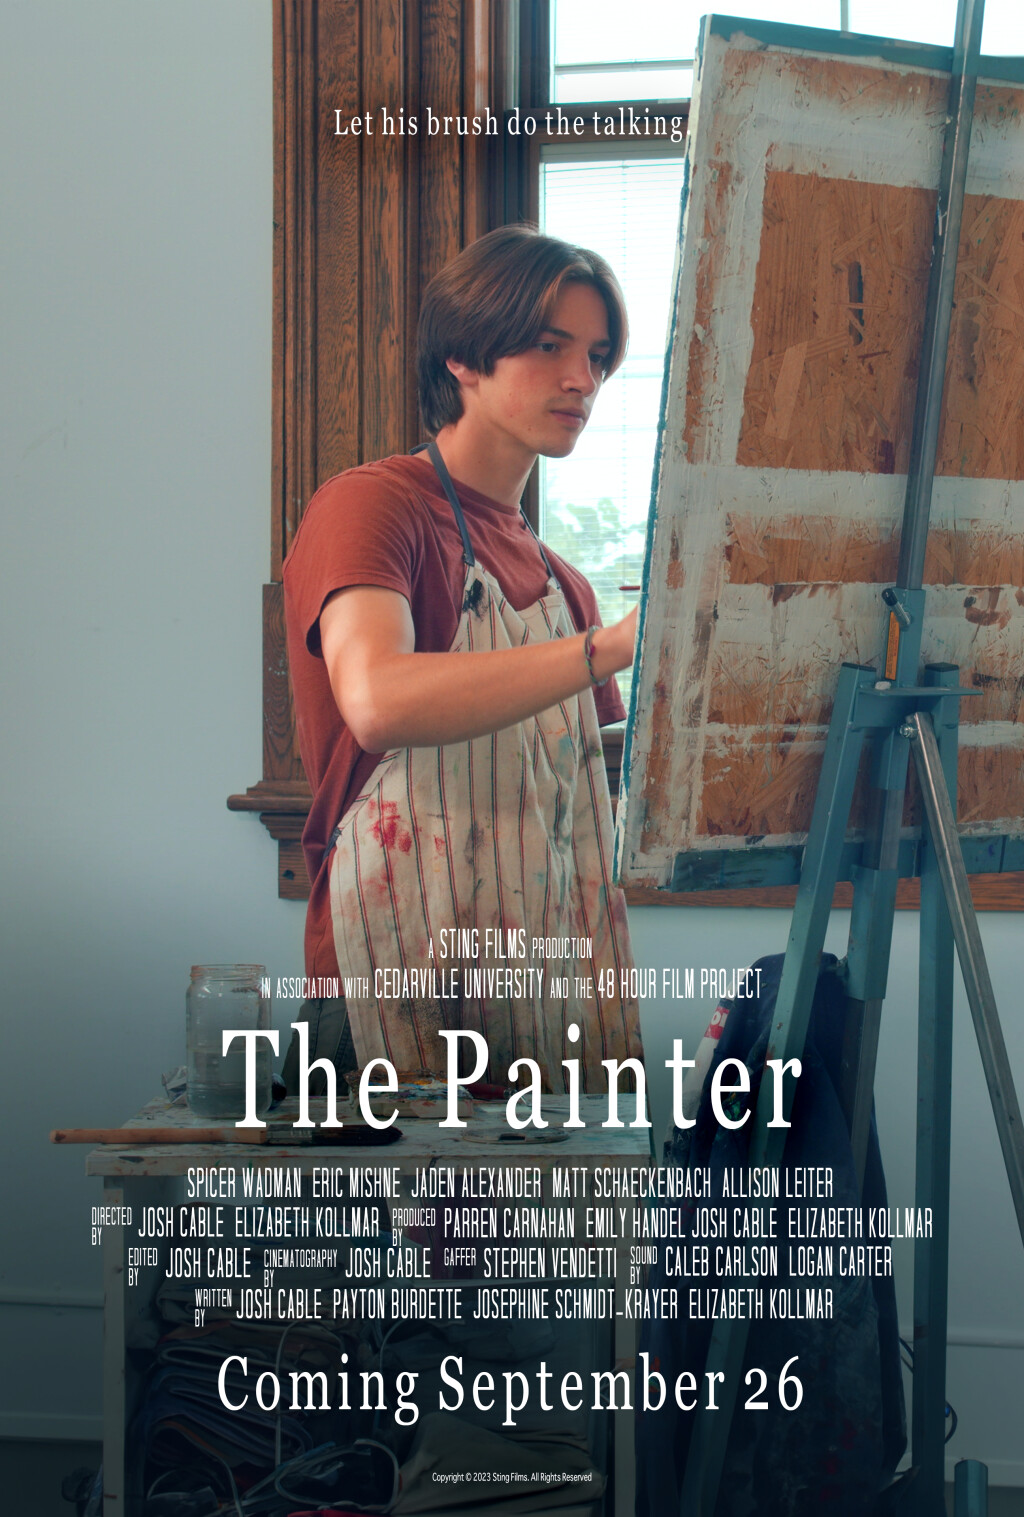 Filmposter for The Painter